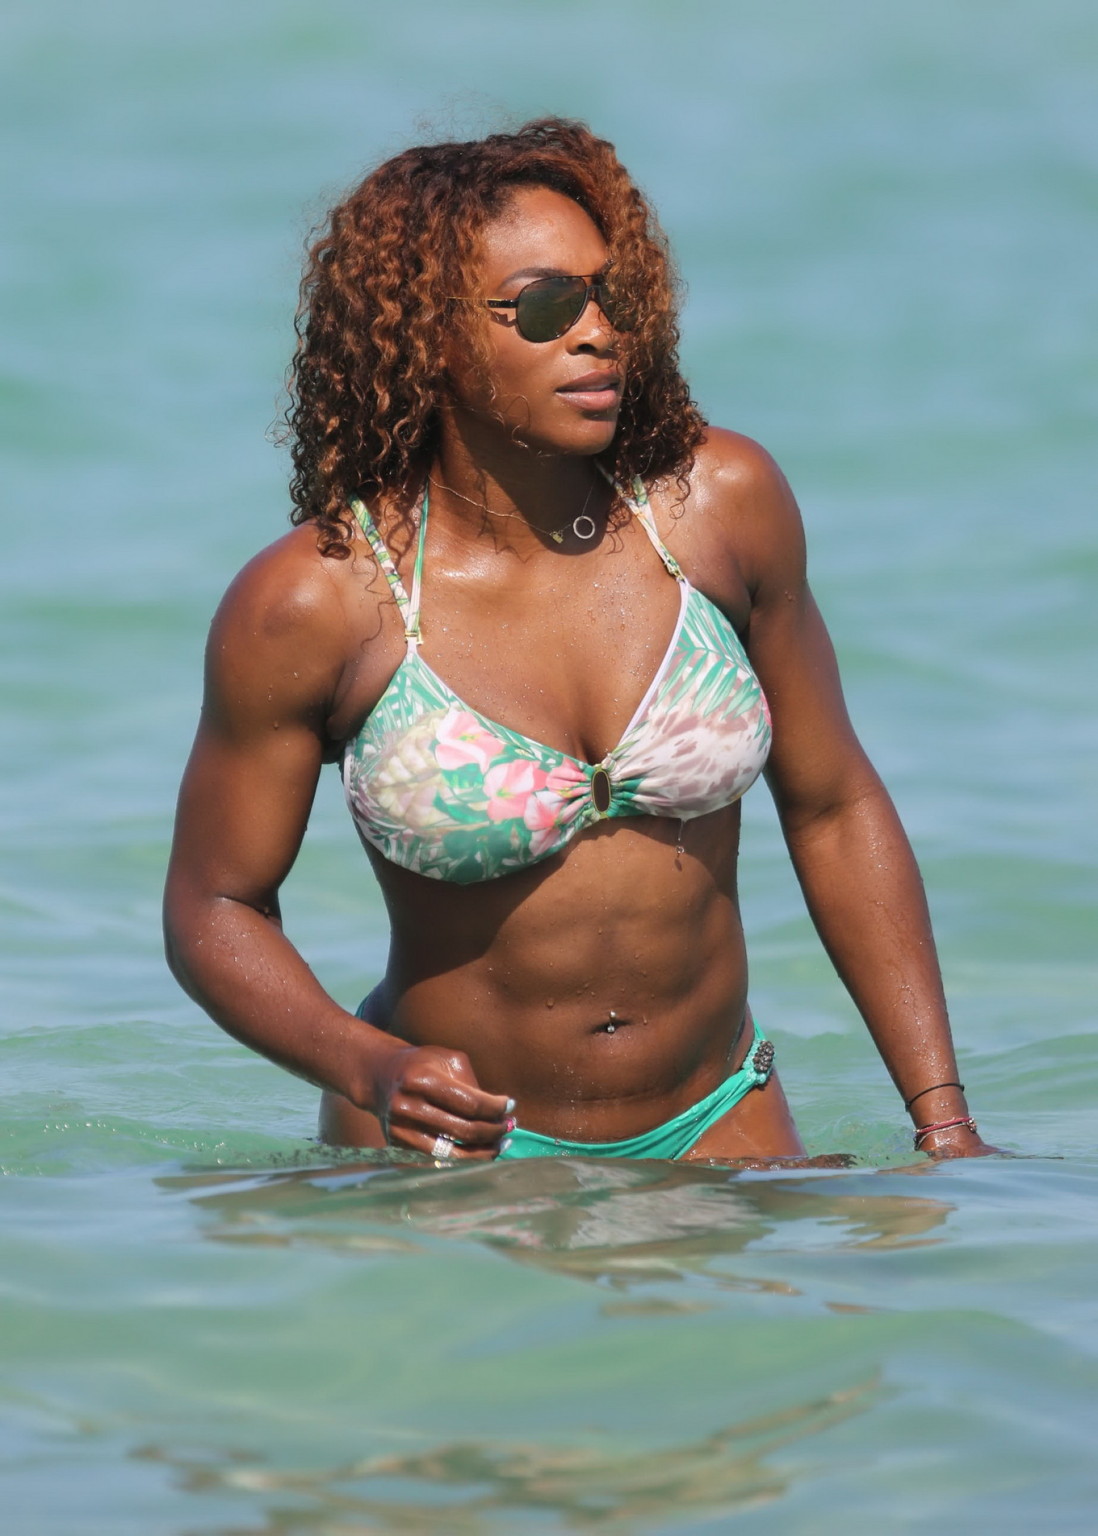 Serena Williams showing off her bikini curves at the beach in Miami #75228634